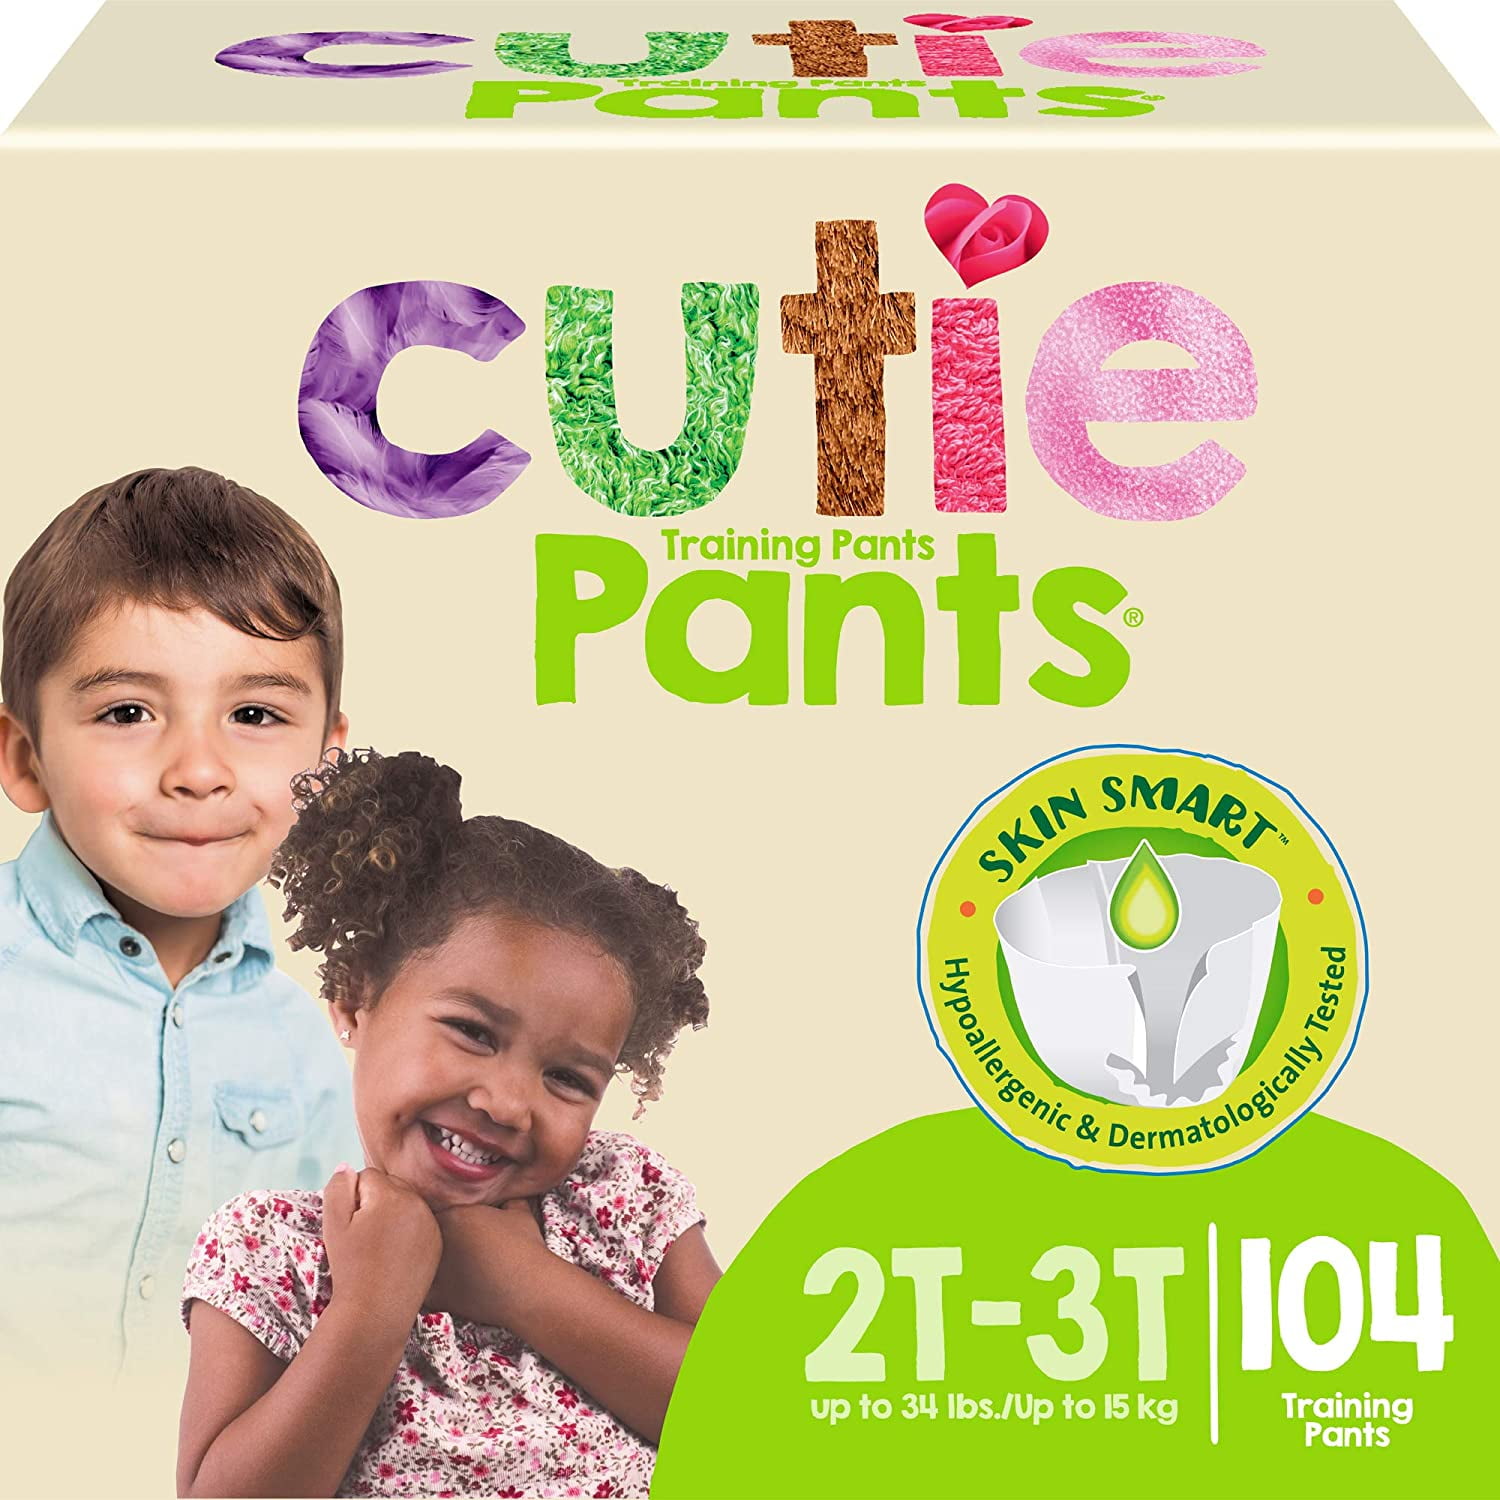 Cuties Girls 3T/4T Refastenable Potty Training Pants, Hypoallergenic with  Skin Smart, 92 Count